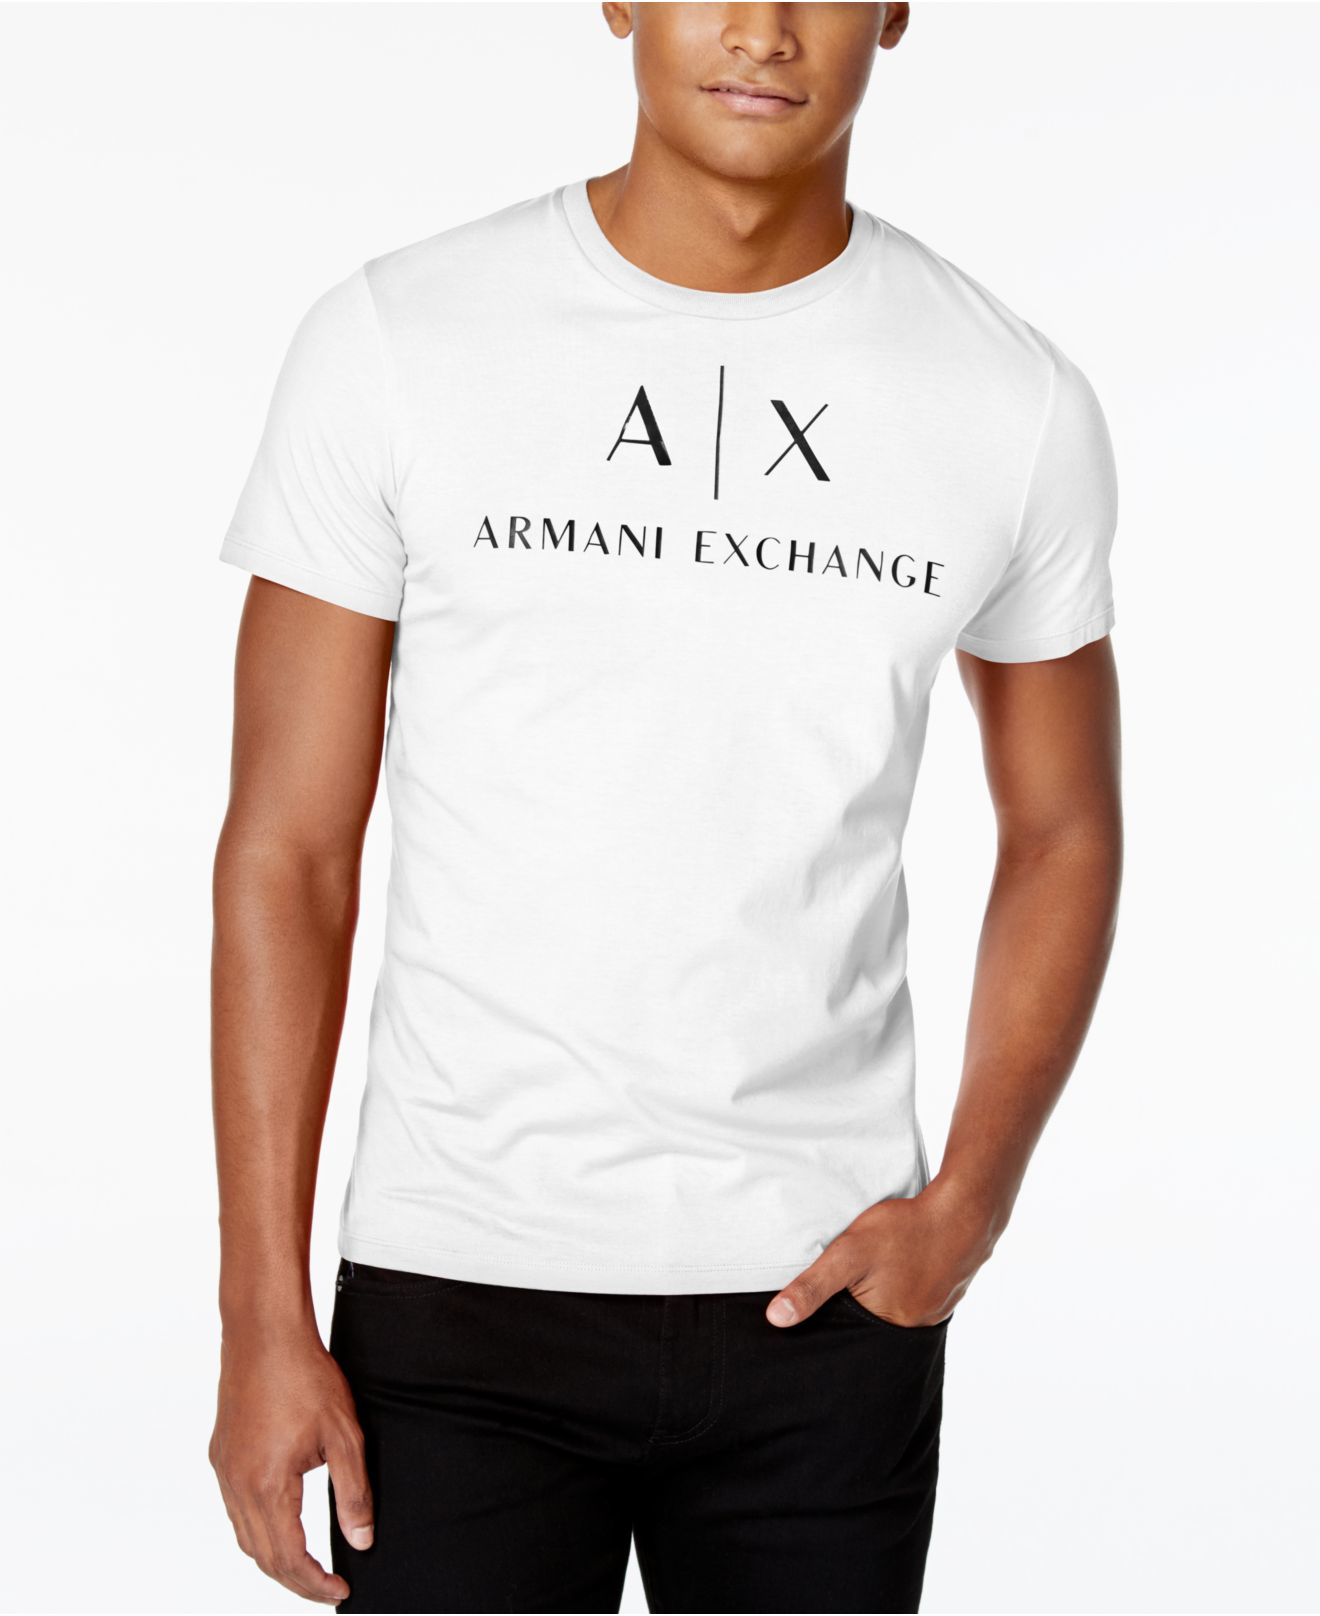 Armani exchange t shirts for mens price online